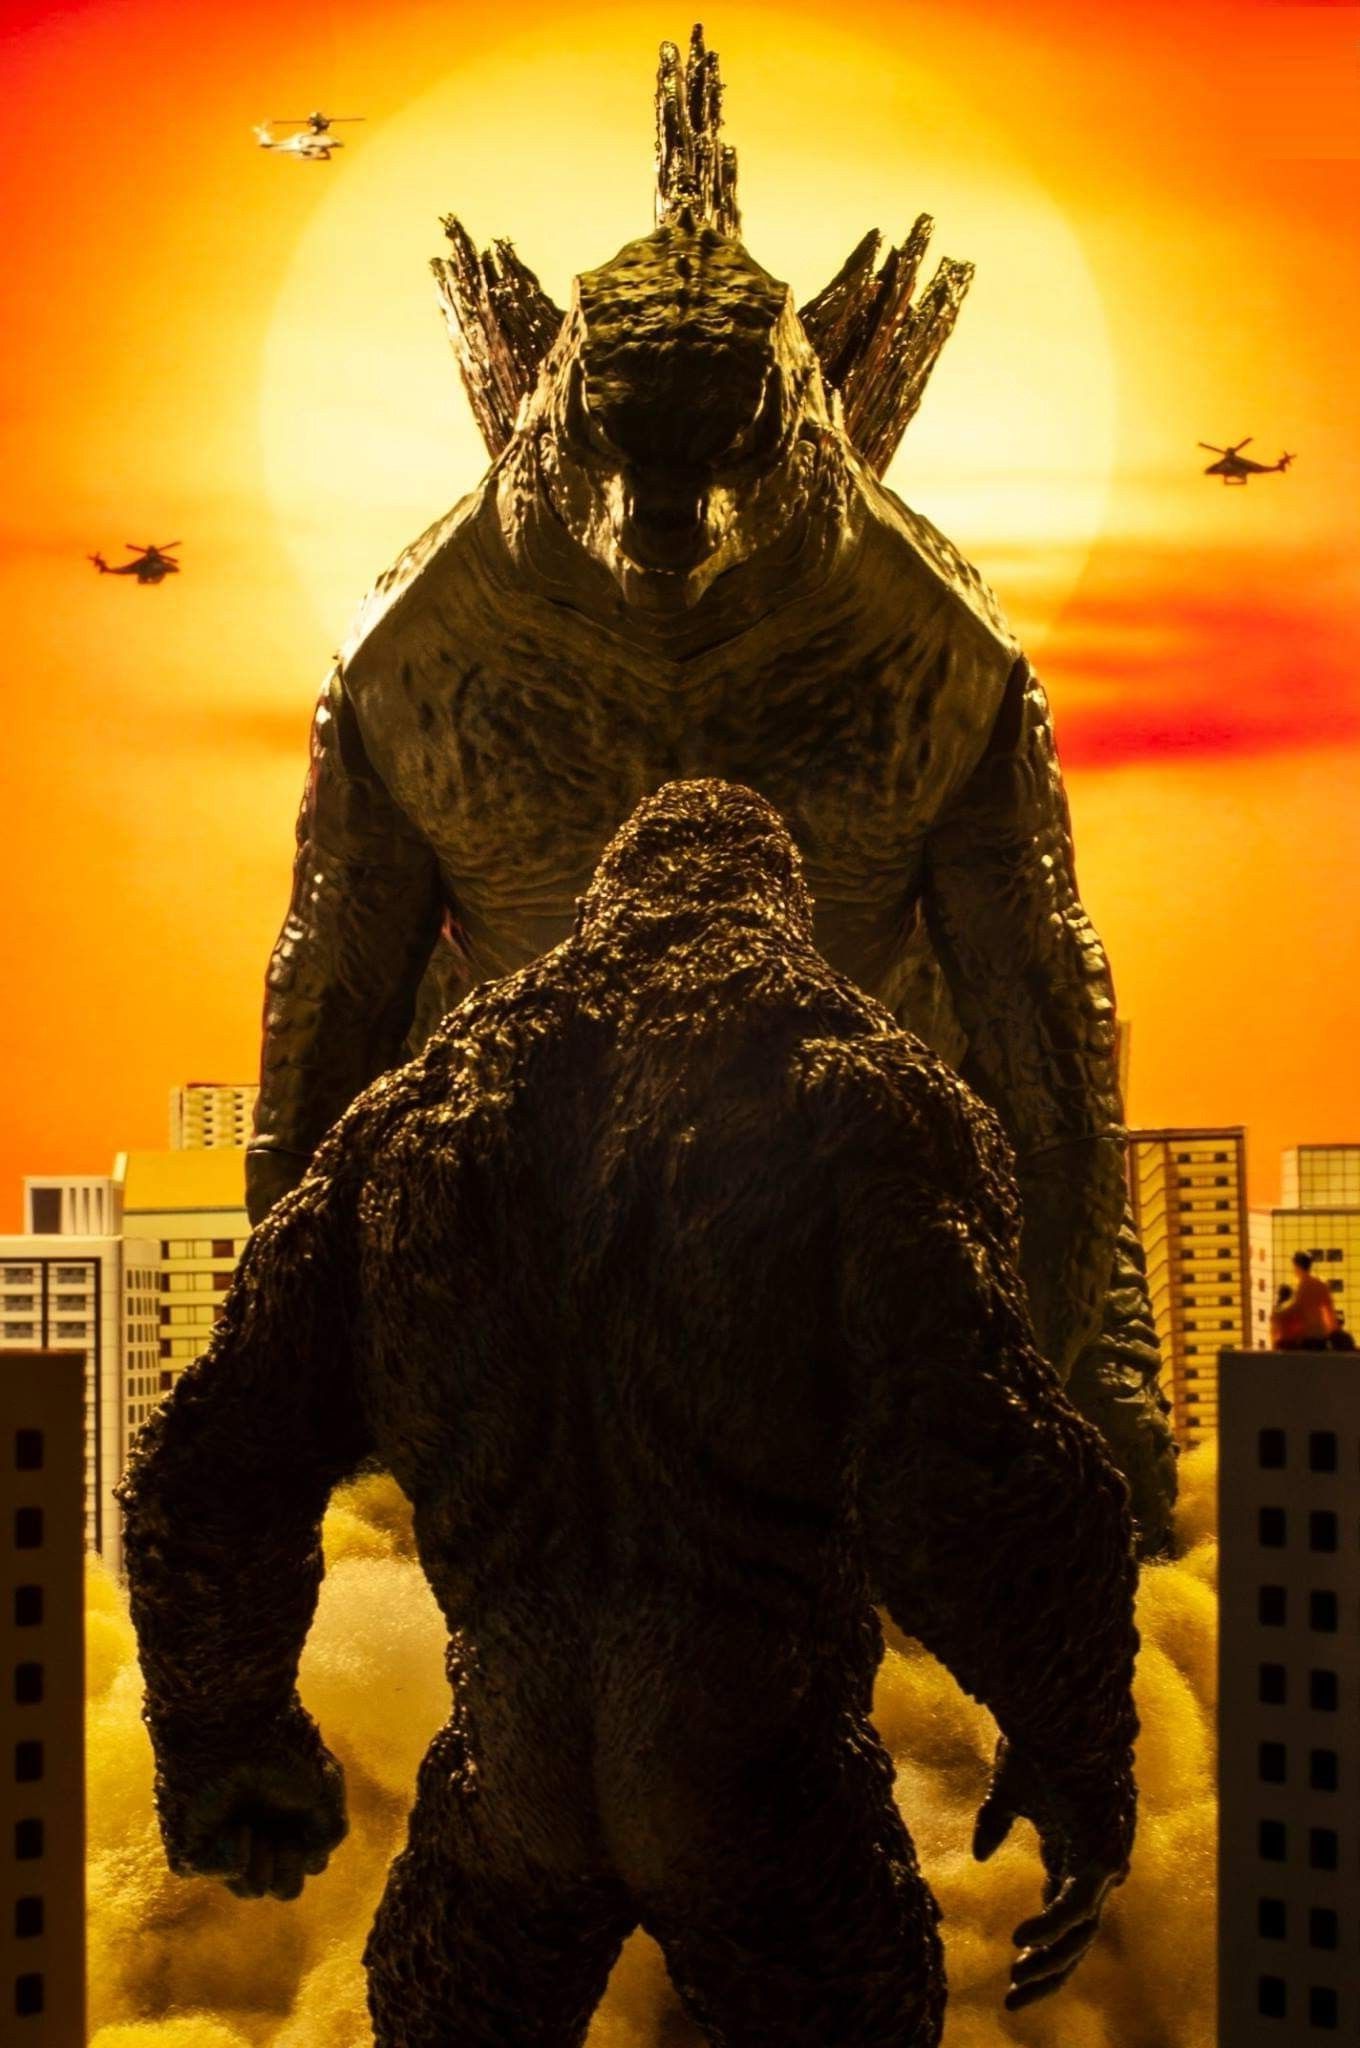 Godzilla vs Kong Wallpaper for mobile phone, tablet, desktop computer and other devices HD and 4K wallpa. King kong vs godzilla, Godzilla wallpaper, Kong godzilla